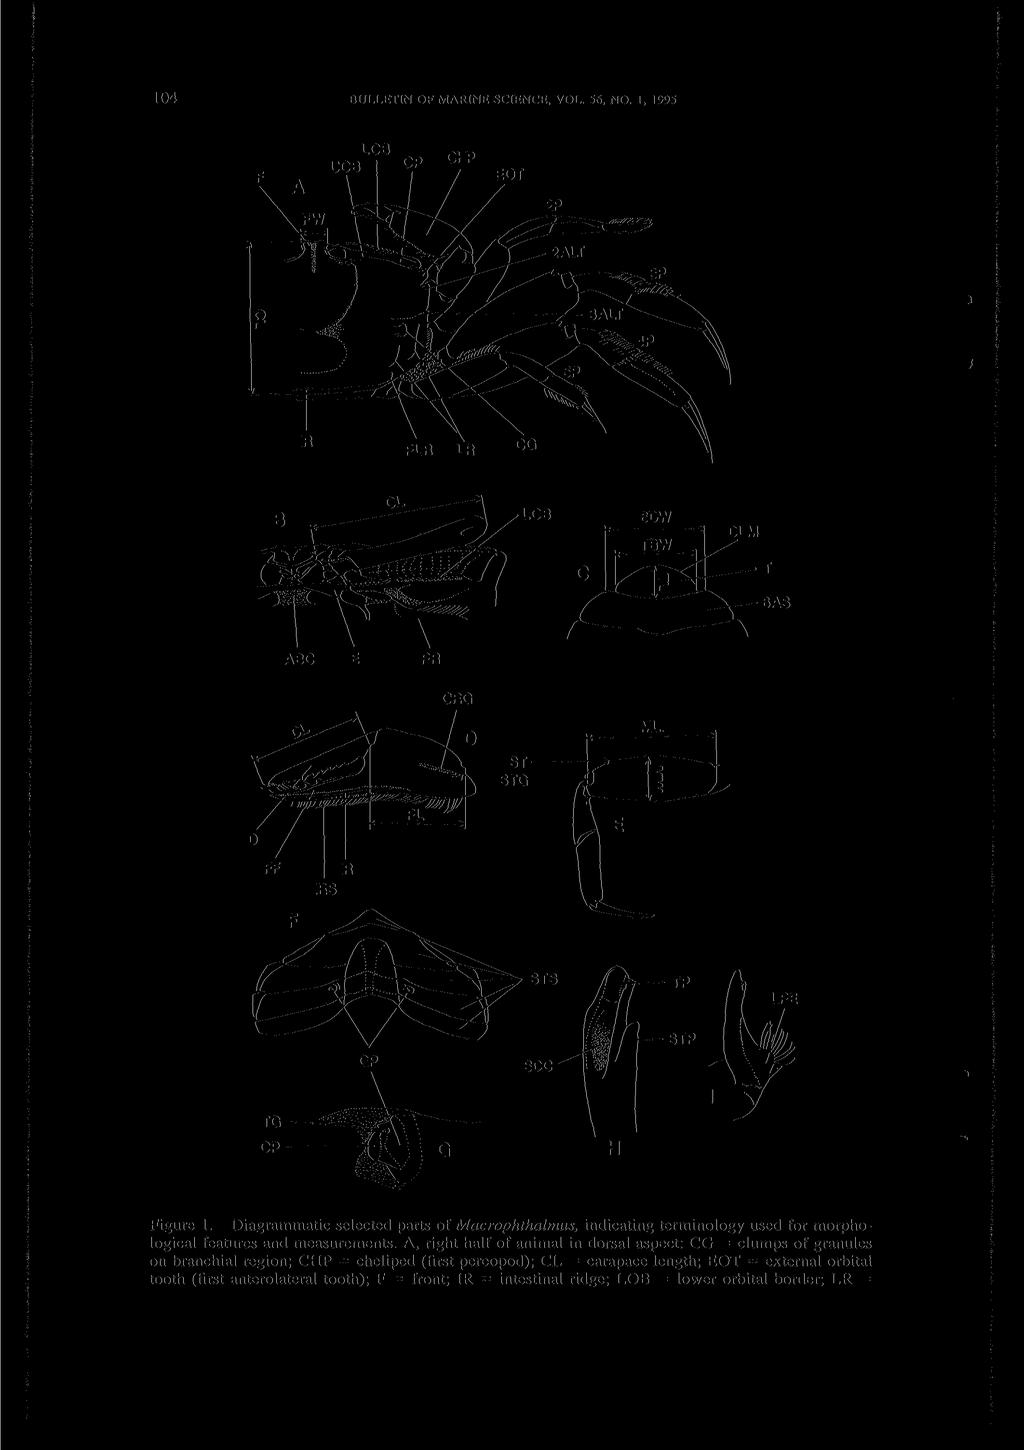 104 BULLETIN OF MARINE SCIENCE, VOL. 56, NO. 1, 1995 CRG Figure 1. Diagrammatic selected parts of Macrophthalmus, indicating terminology used for morphological features and measurements.